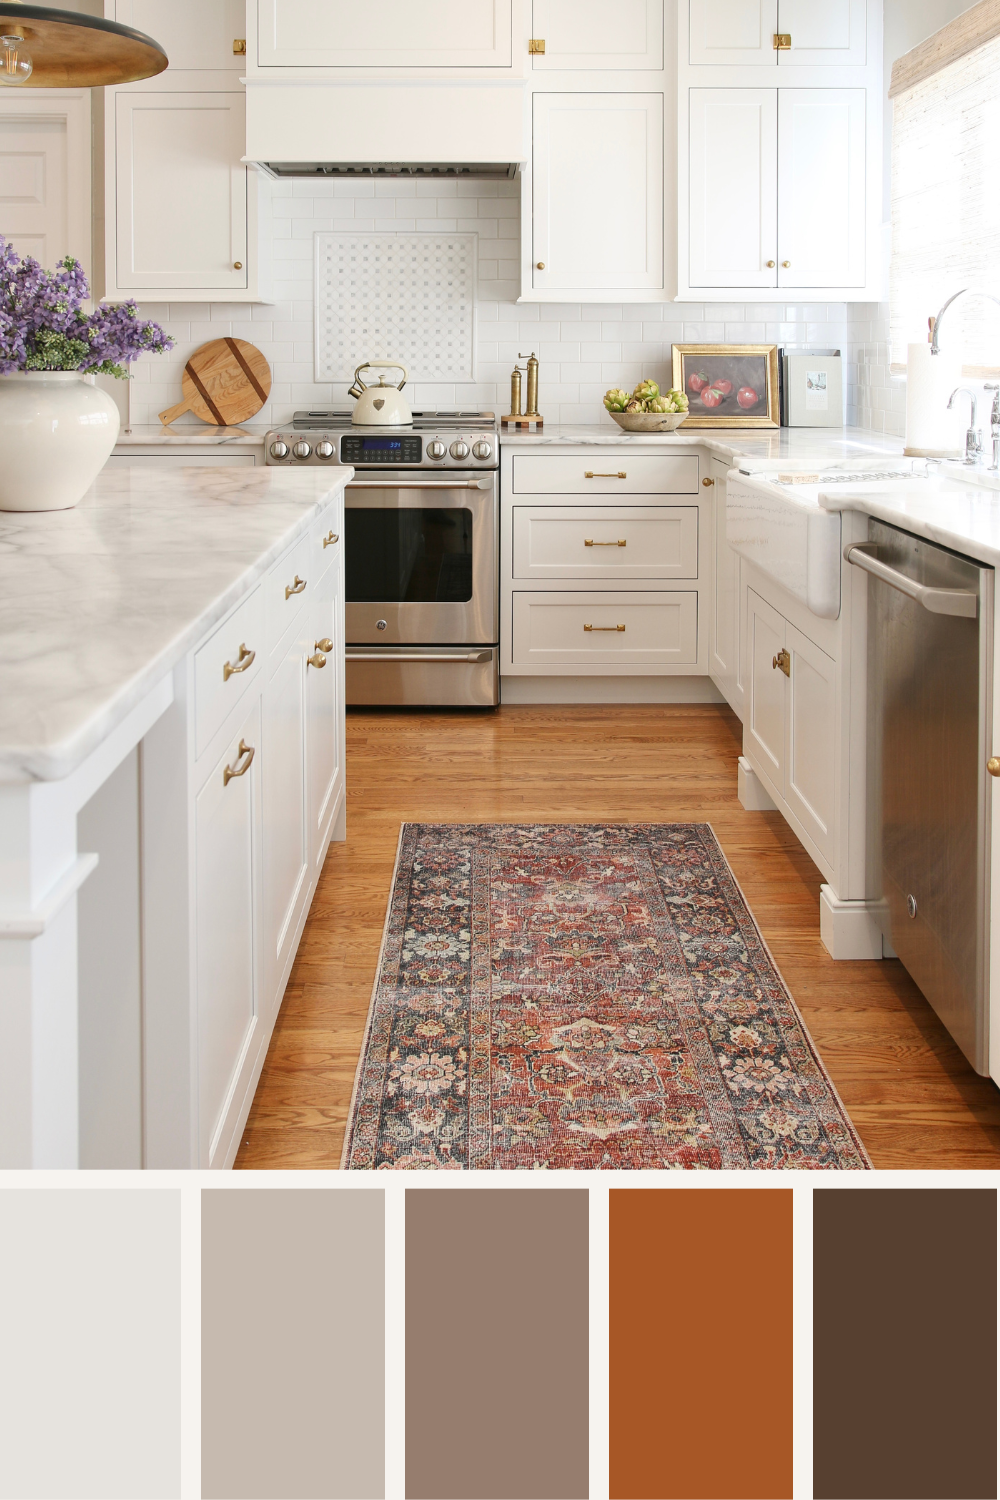 classic white kitchen with honed marble countertops, unlacquered brass cabinet hardware, fall accents throughout space, bowl with artichokes and still life apple artwork on counter, kitchen runner rug with fall colors, rustic red tones